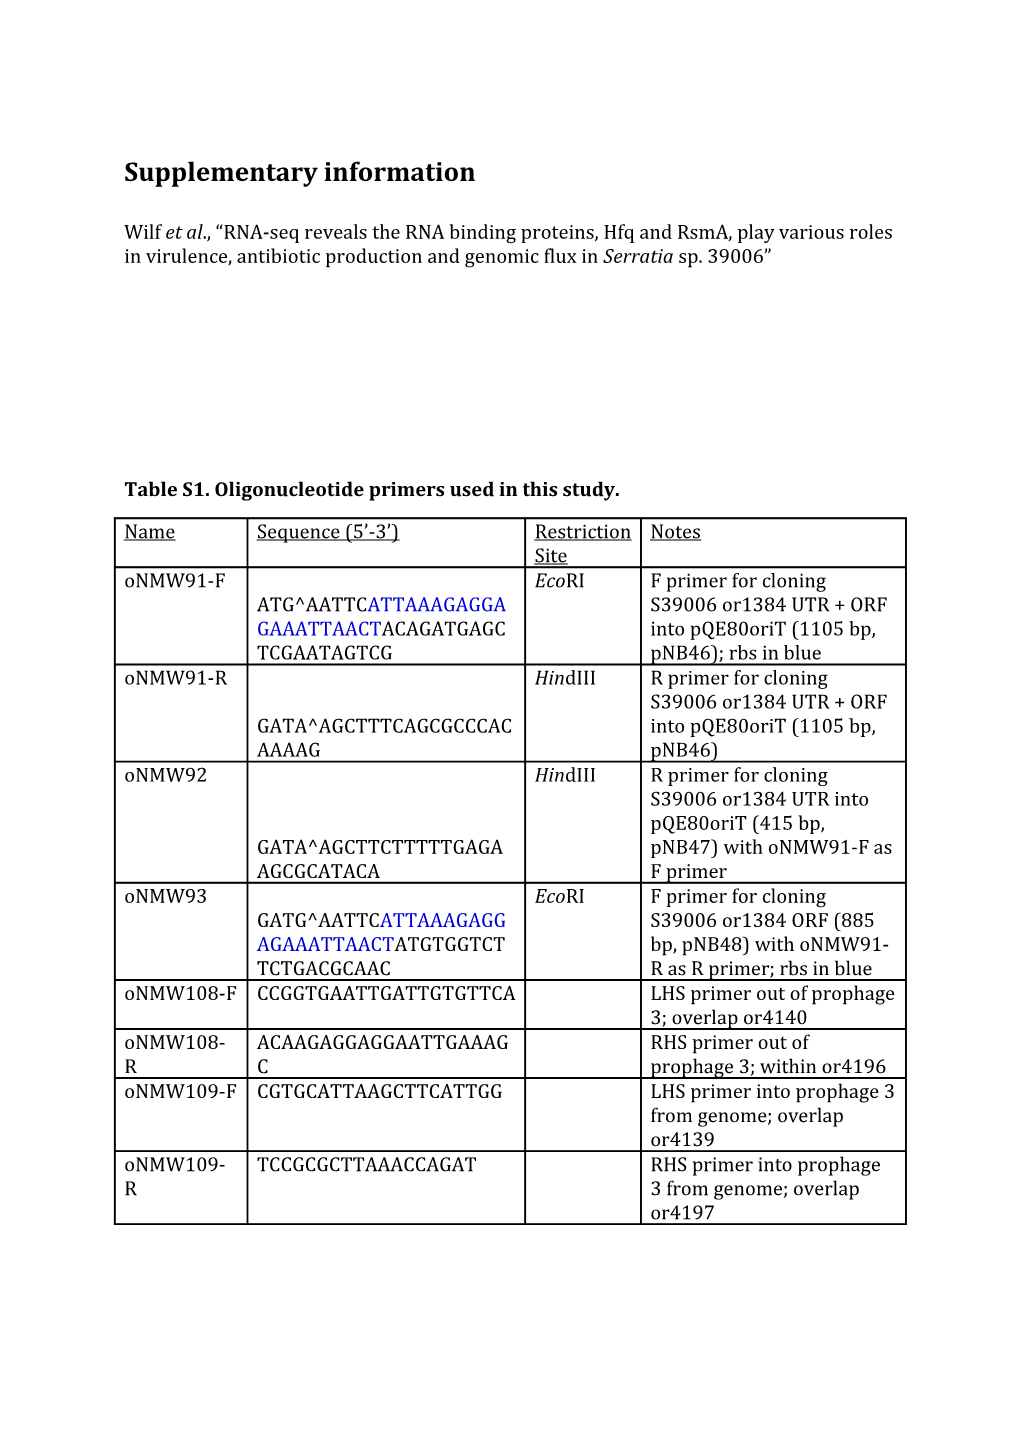 Table S1. Oligonucleotide Primers Used in This Study. 1